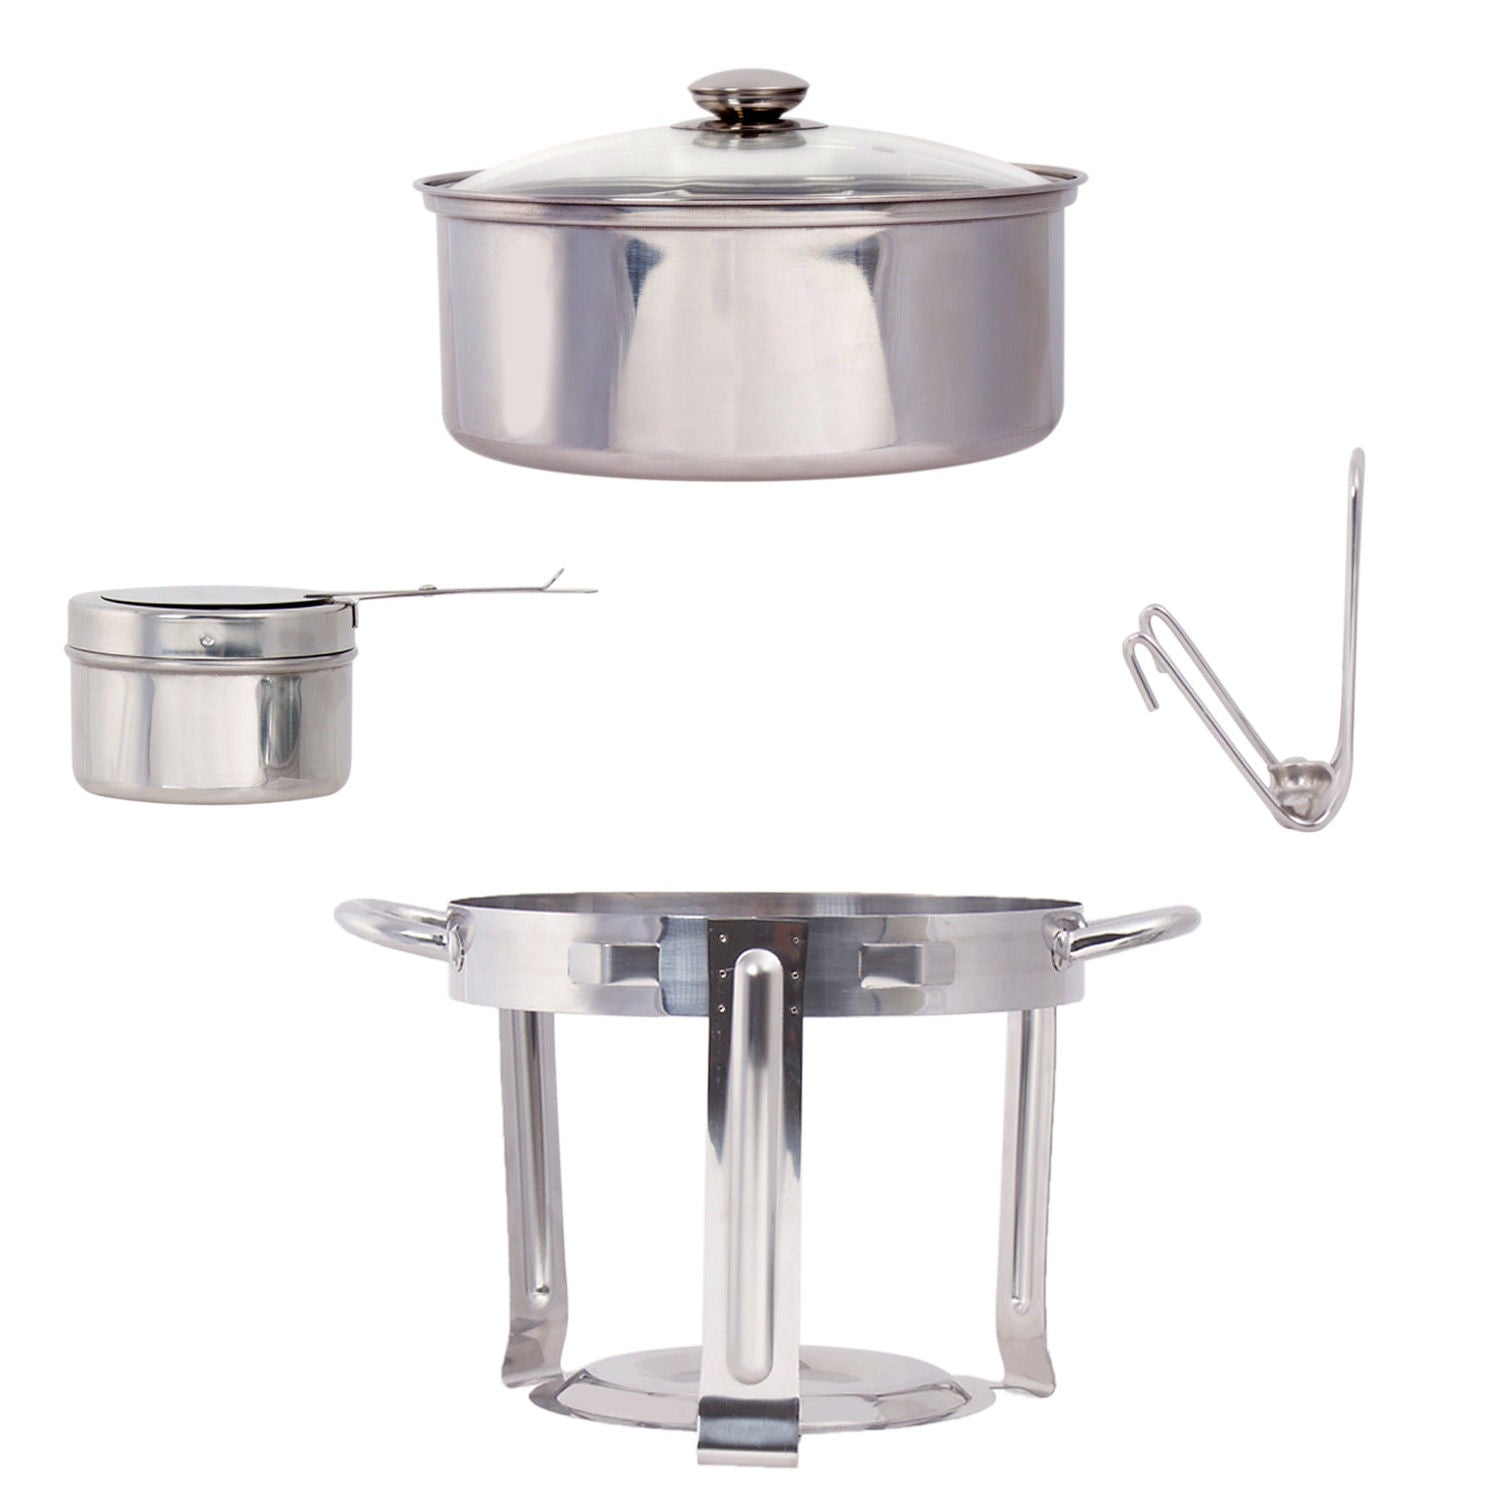 Stainless Steel Chafing Dish Set 4.5 QT Party Buffet Round Chafing Dish Pot Set